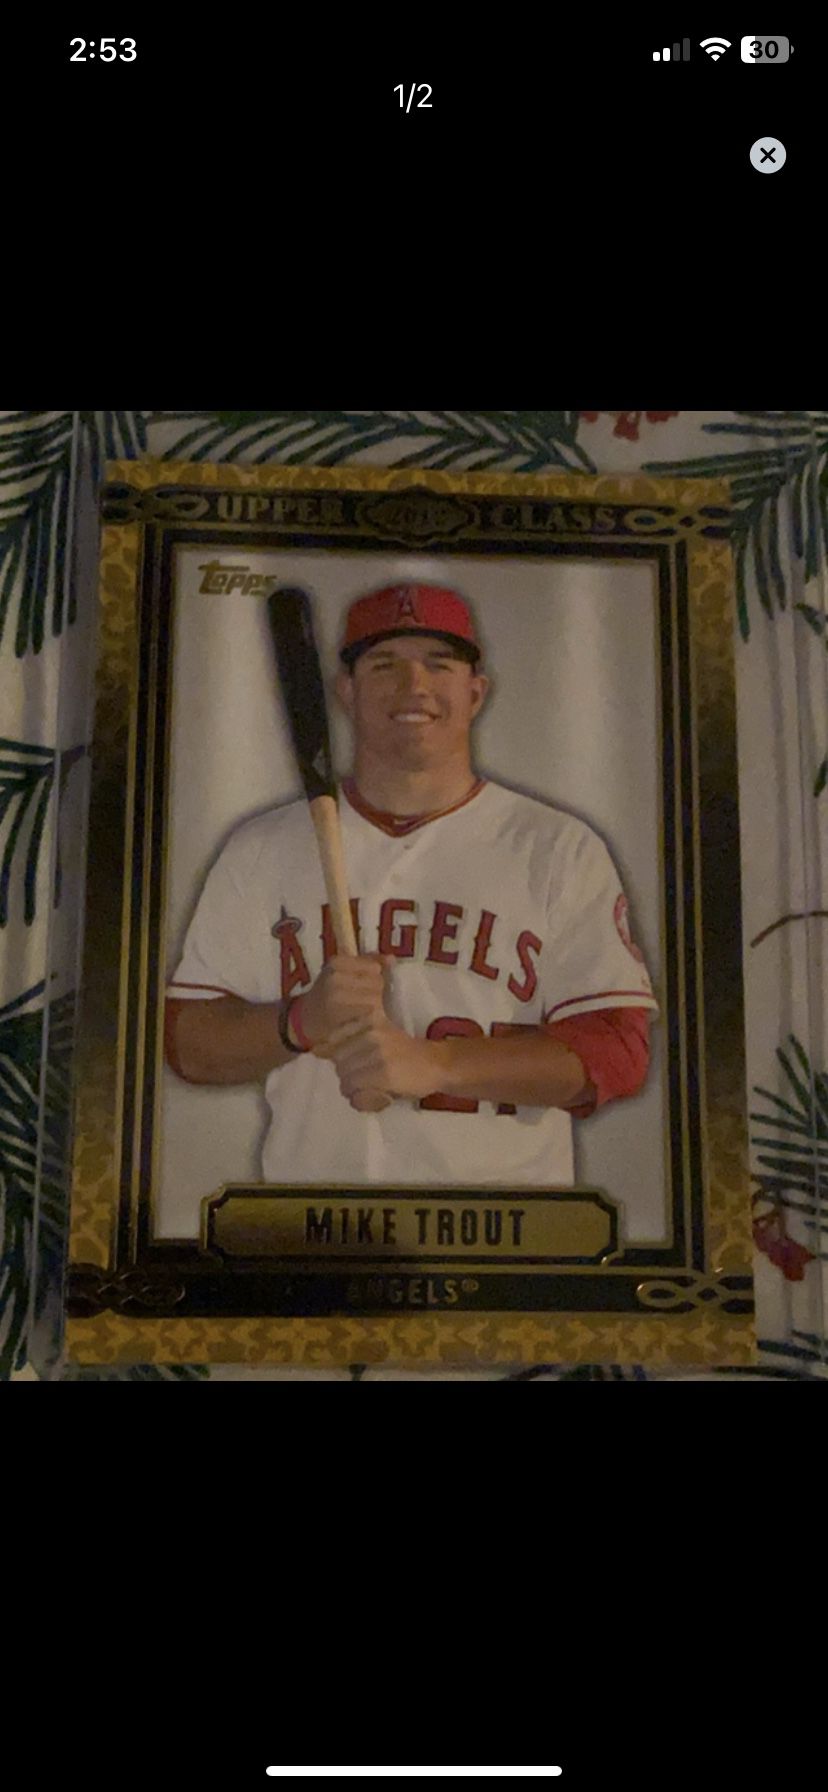 2014 Topps Upper Class Mike Trout